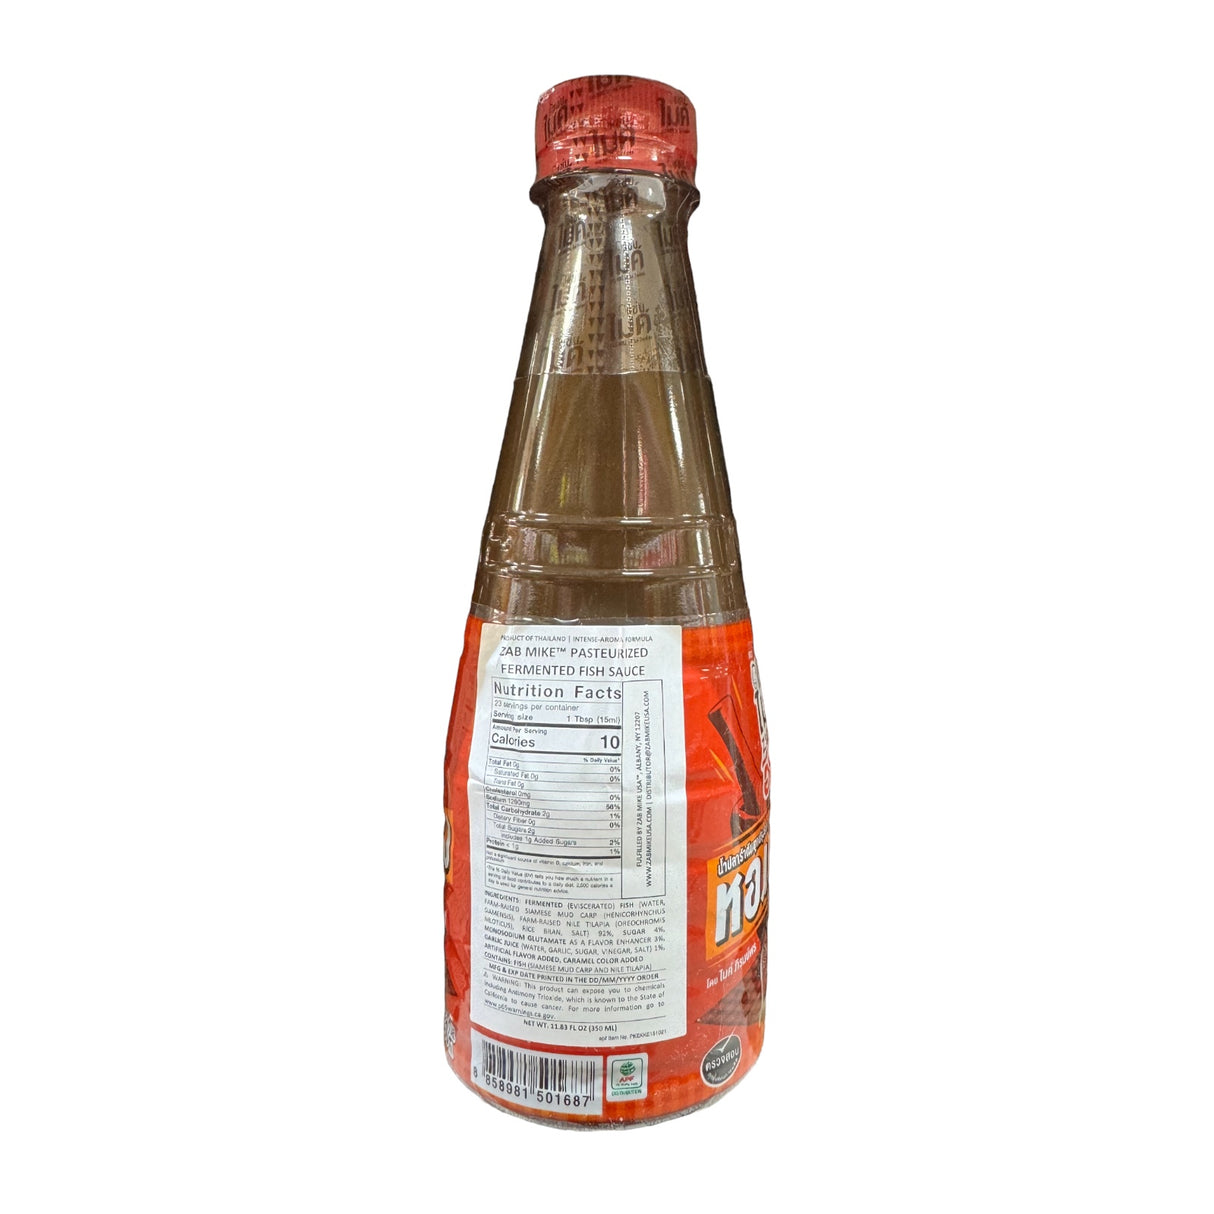 ZAB MIKE Pasteurized Fish Sauce Intense-Aroma Formula (Ready-To-Cook)